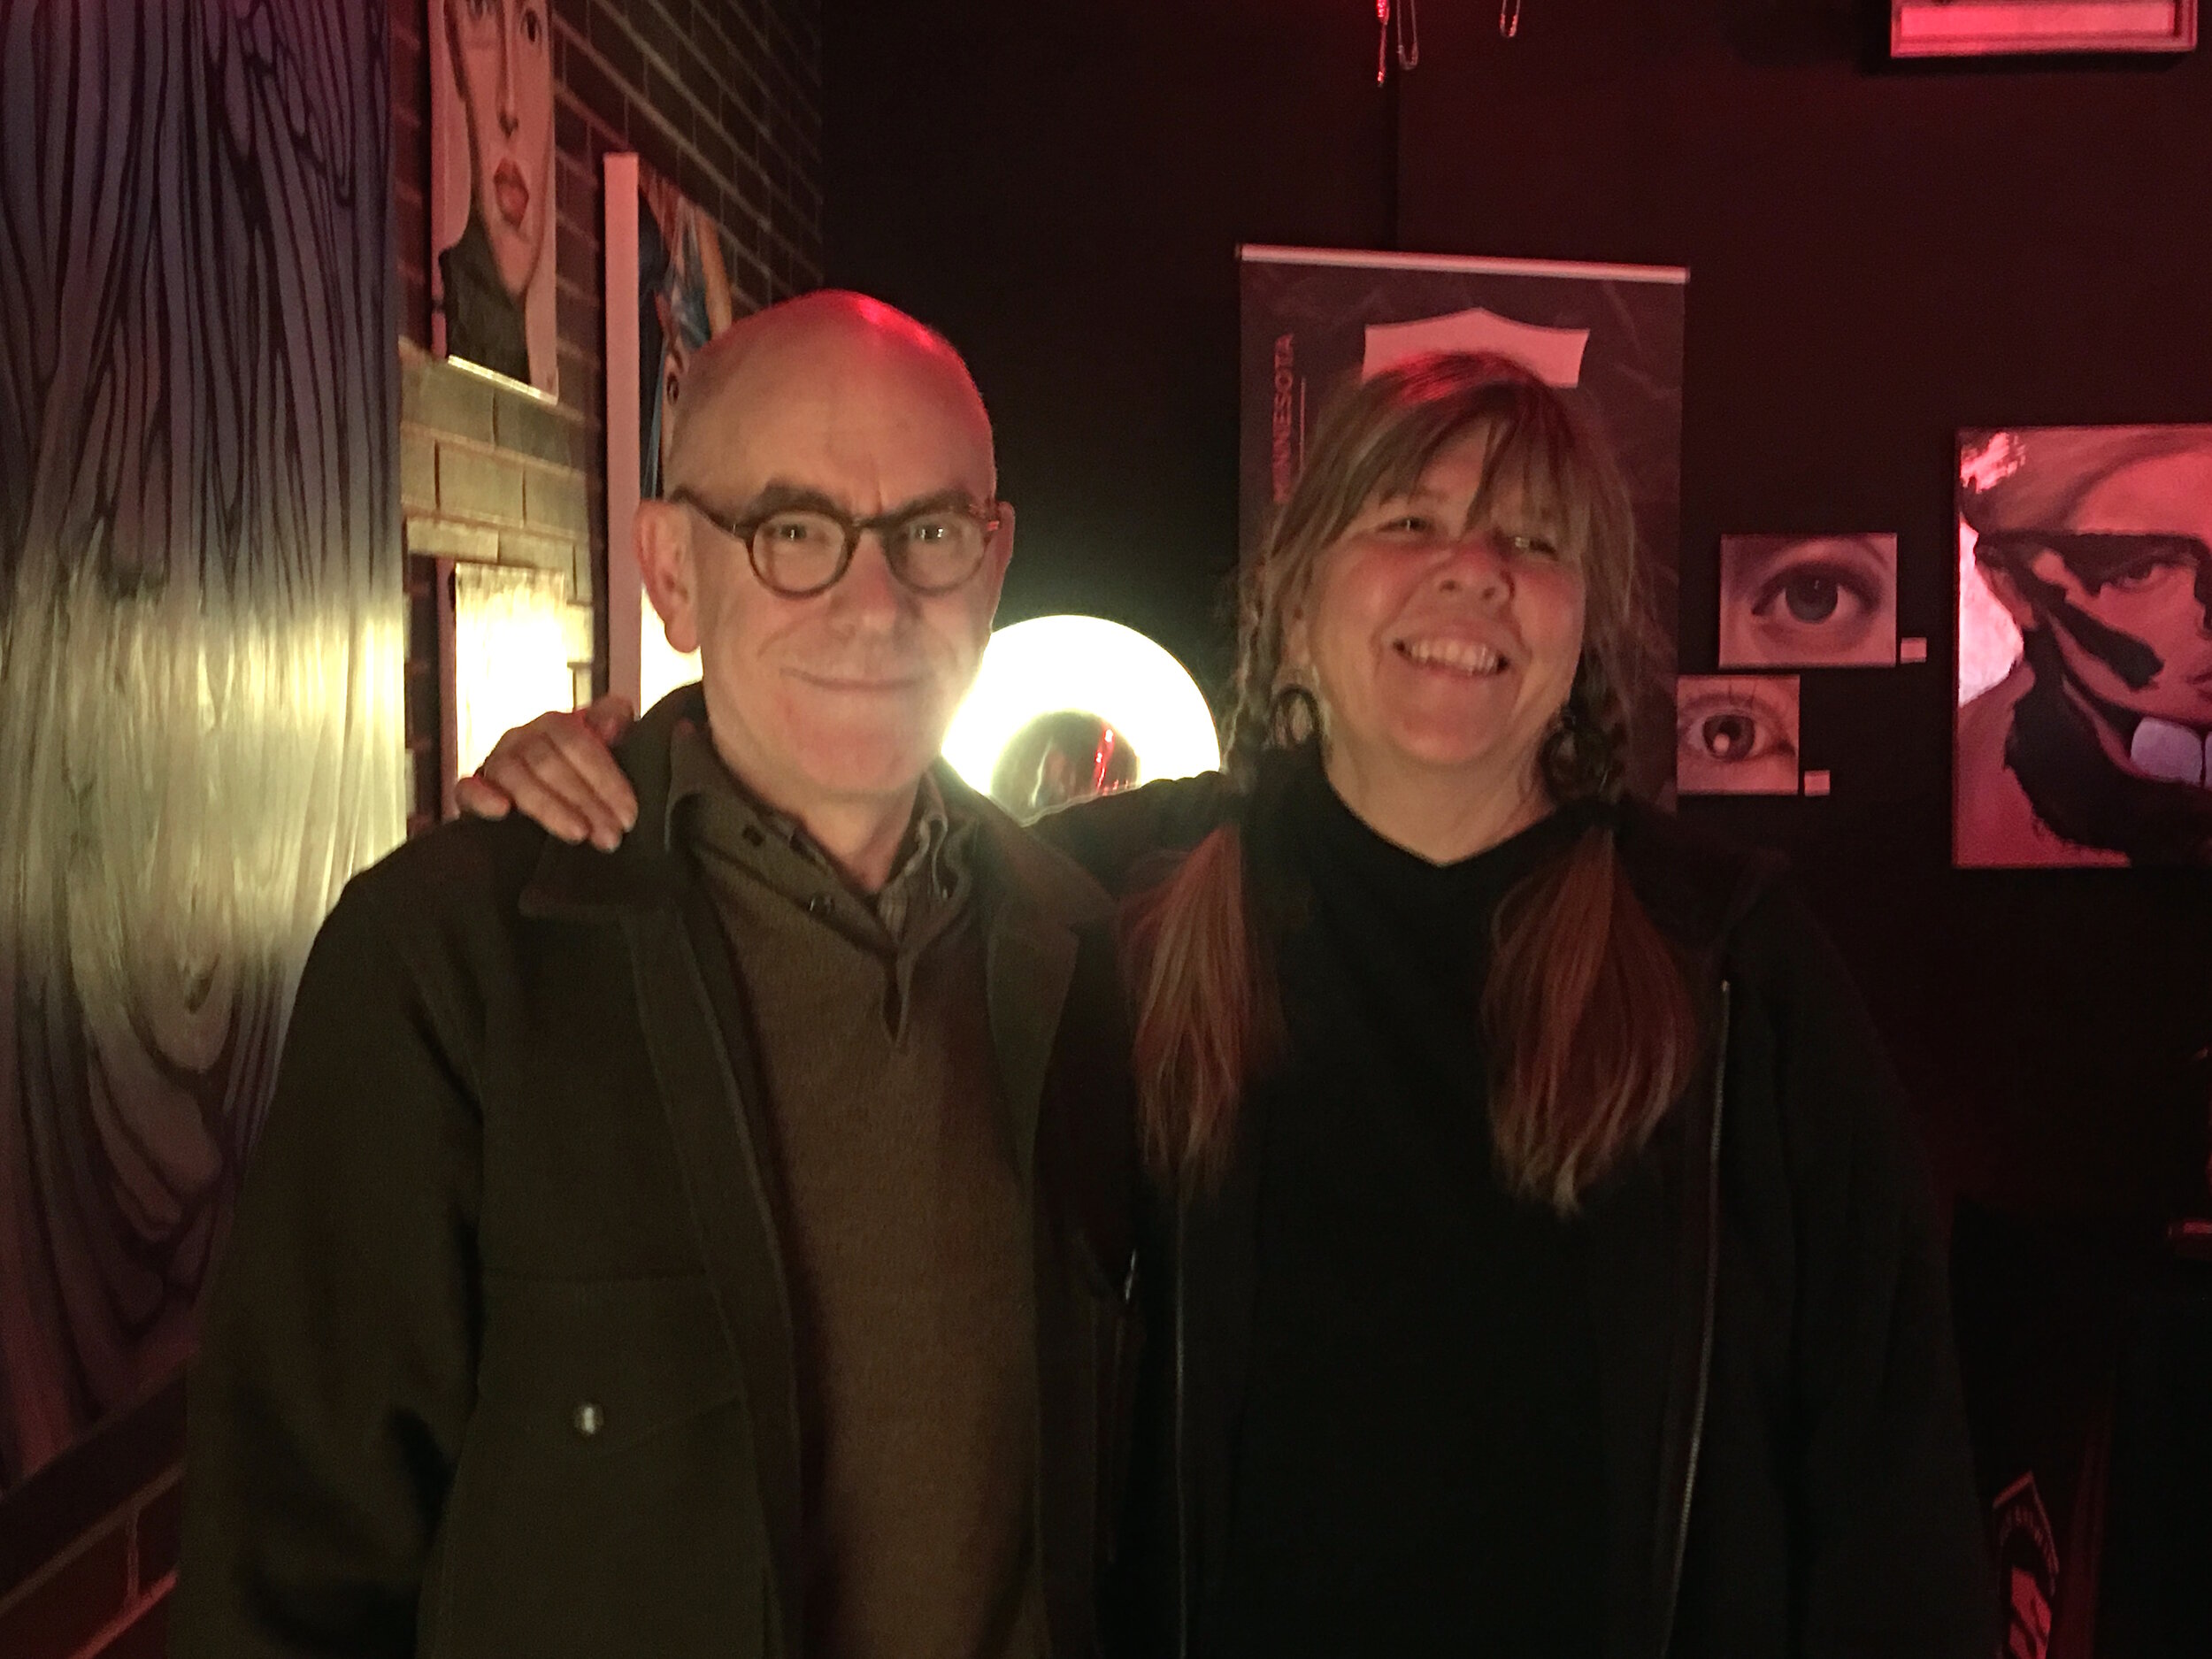  Jeff Nelson (Dischord Records, Minor Threat) and Lori Barbero (Babes in Toyland) at the Sound Unseen Film Festival, 2019.  